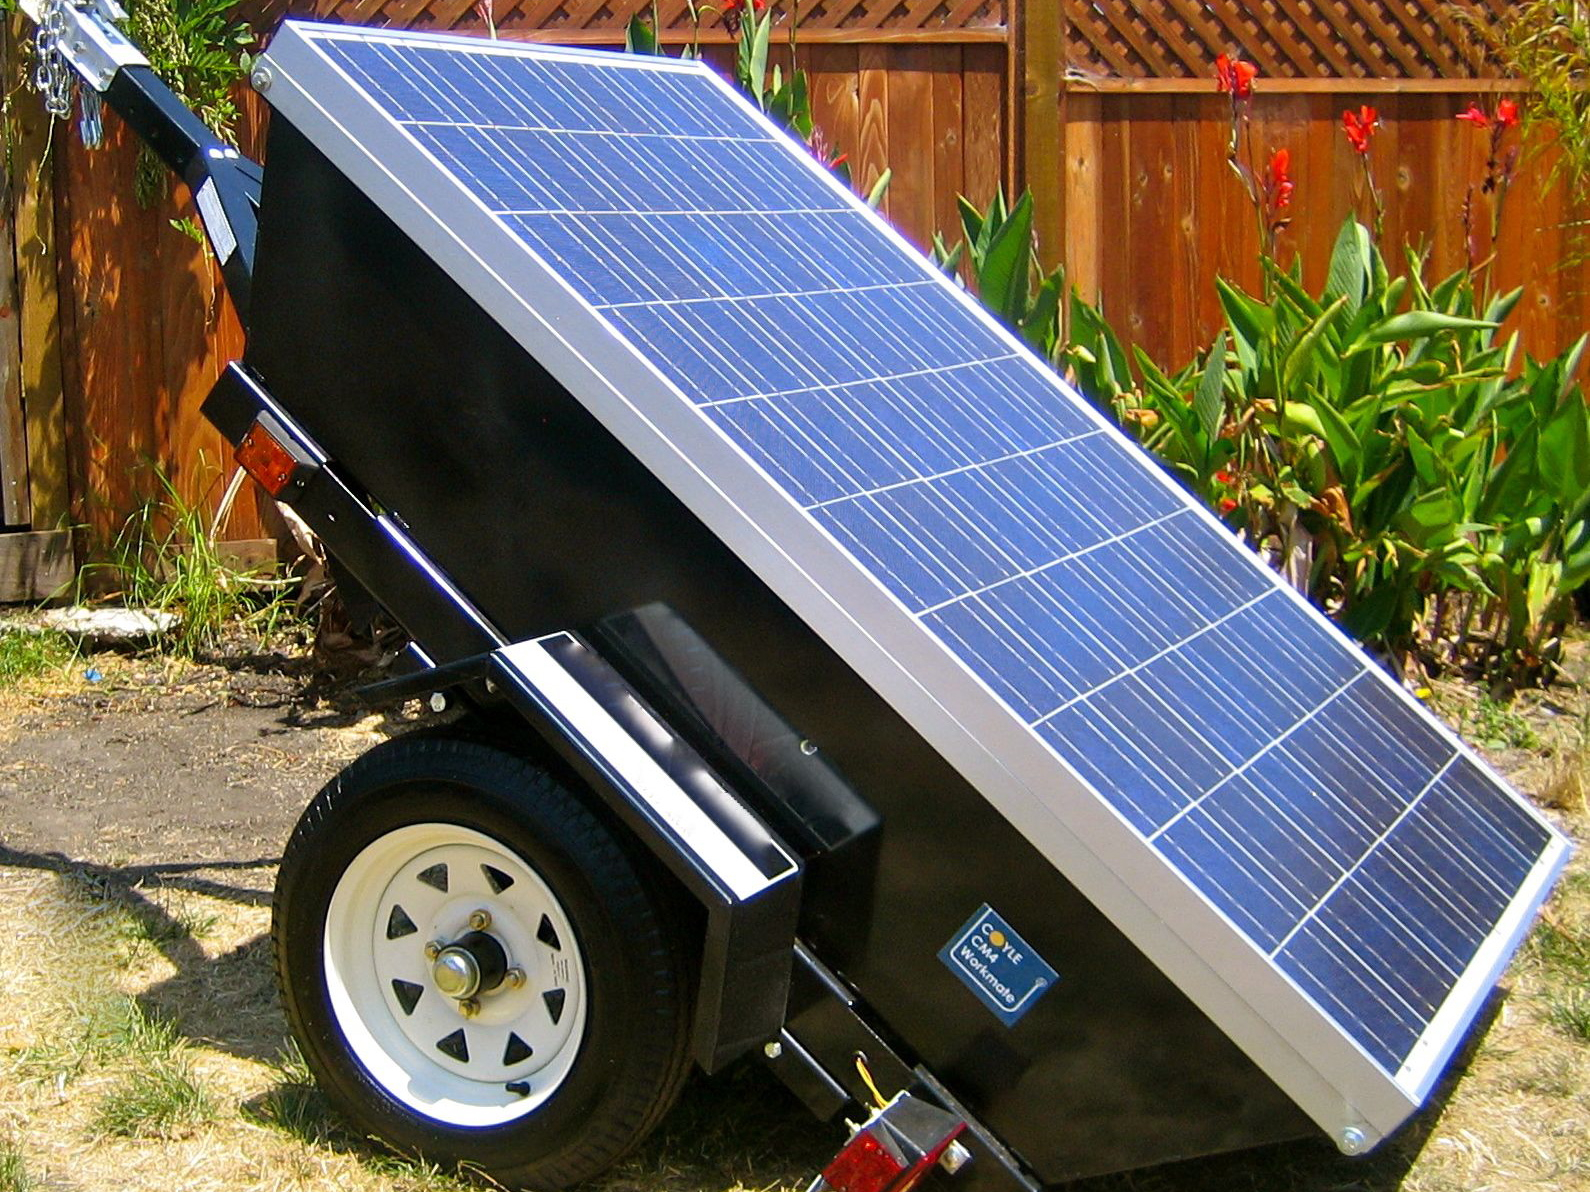 solar-power-promise-for-the-future-of-your-home-green-energy-sensation